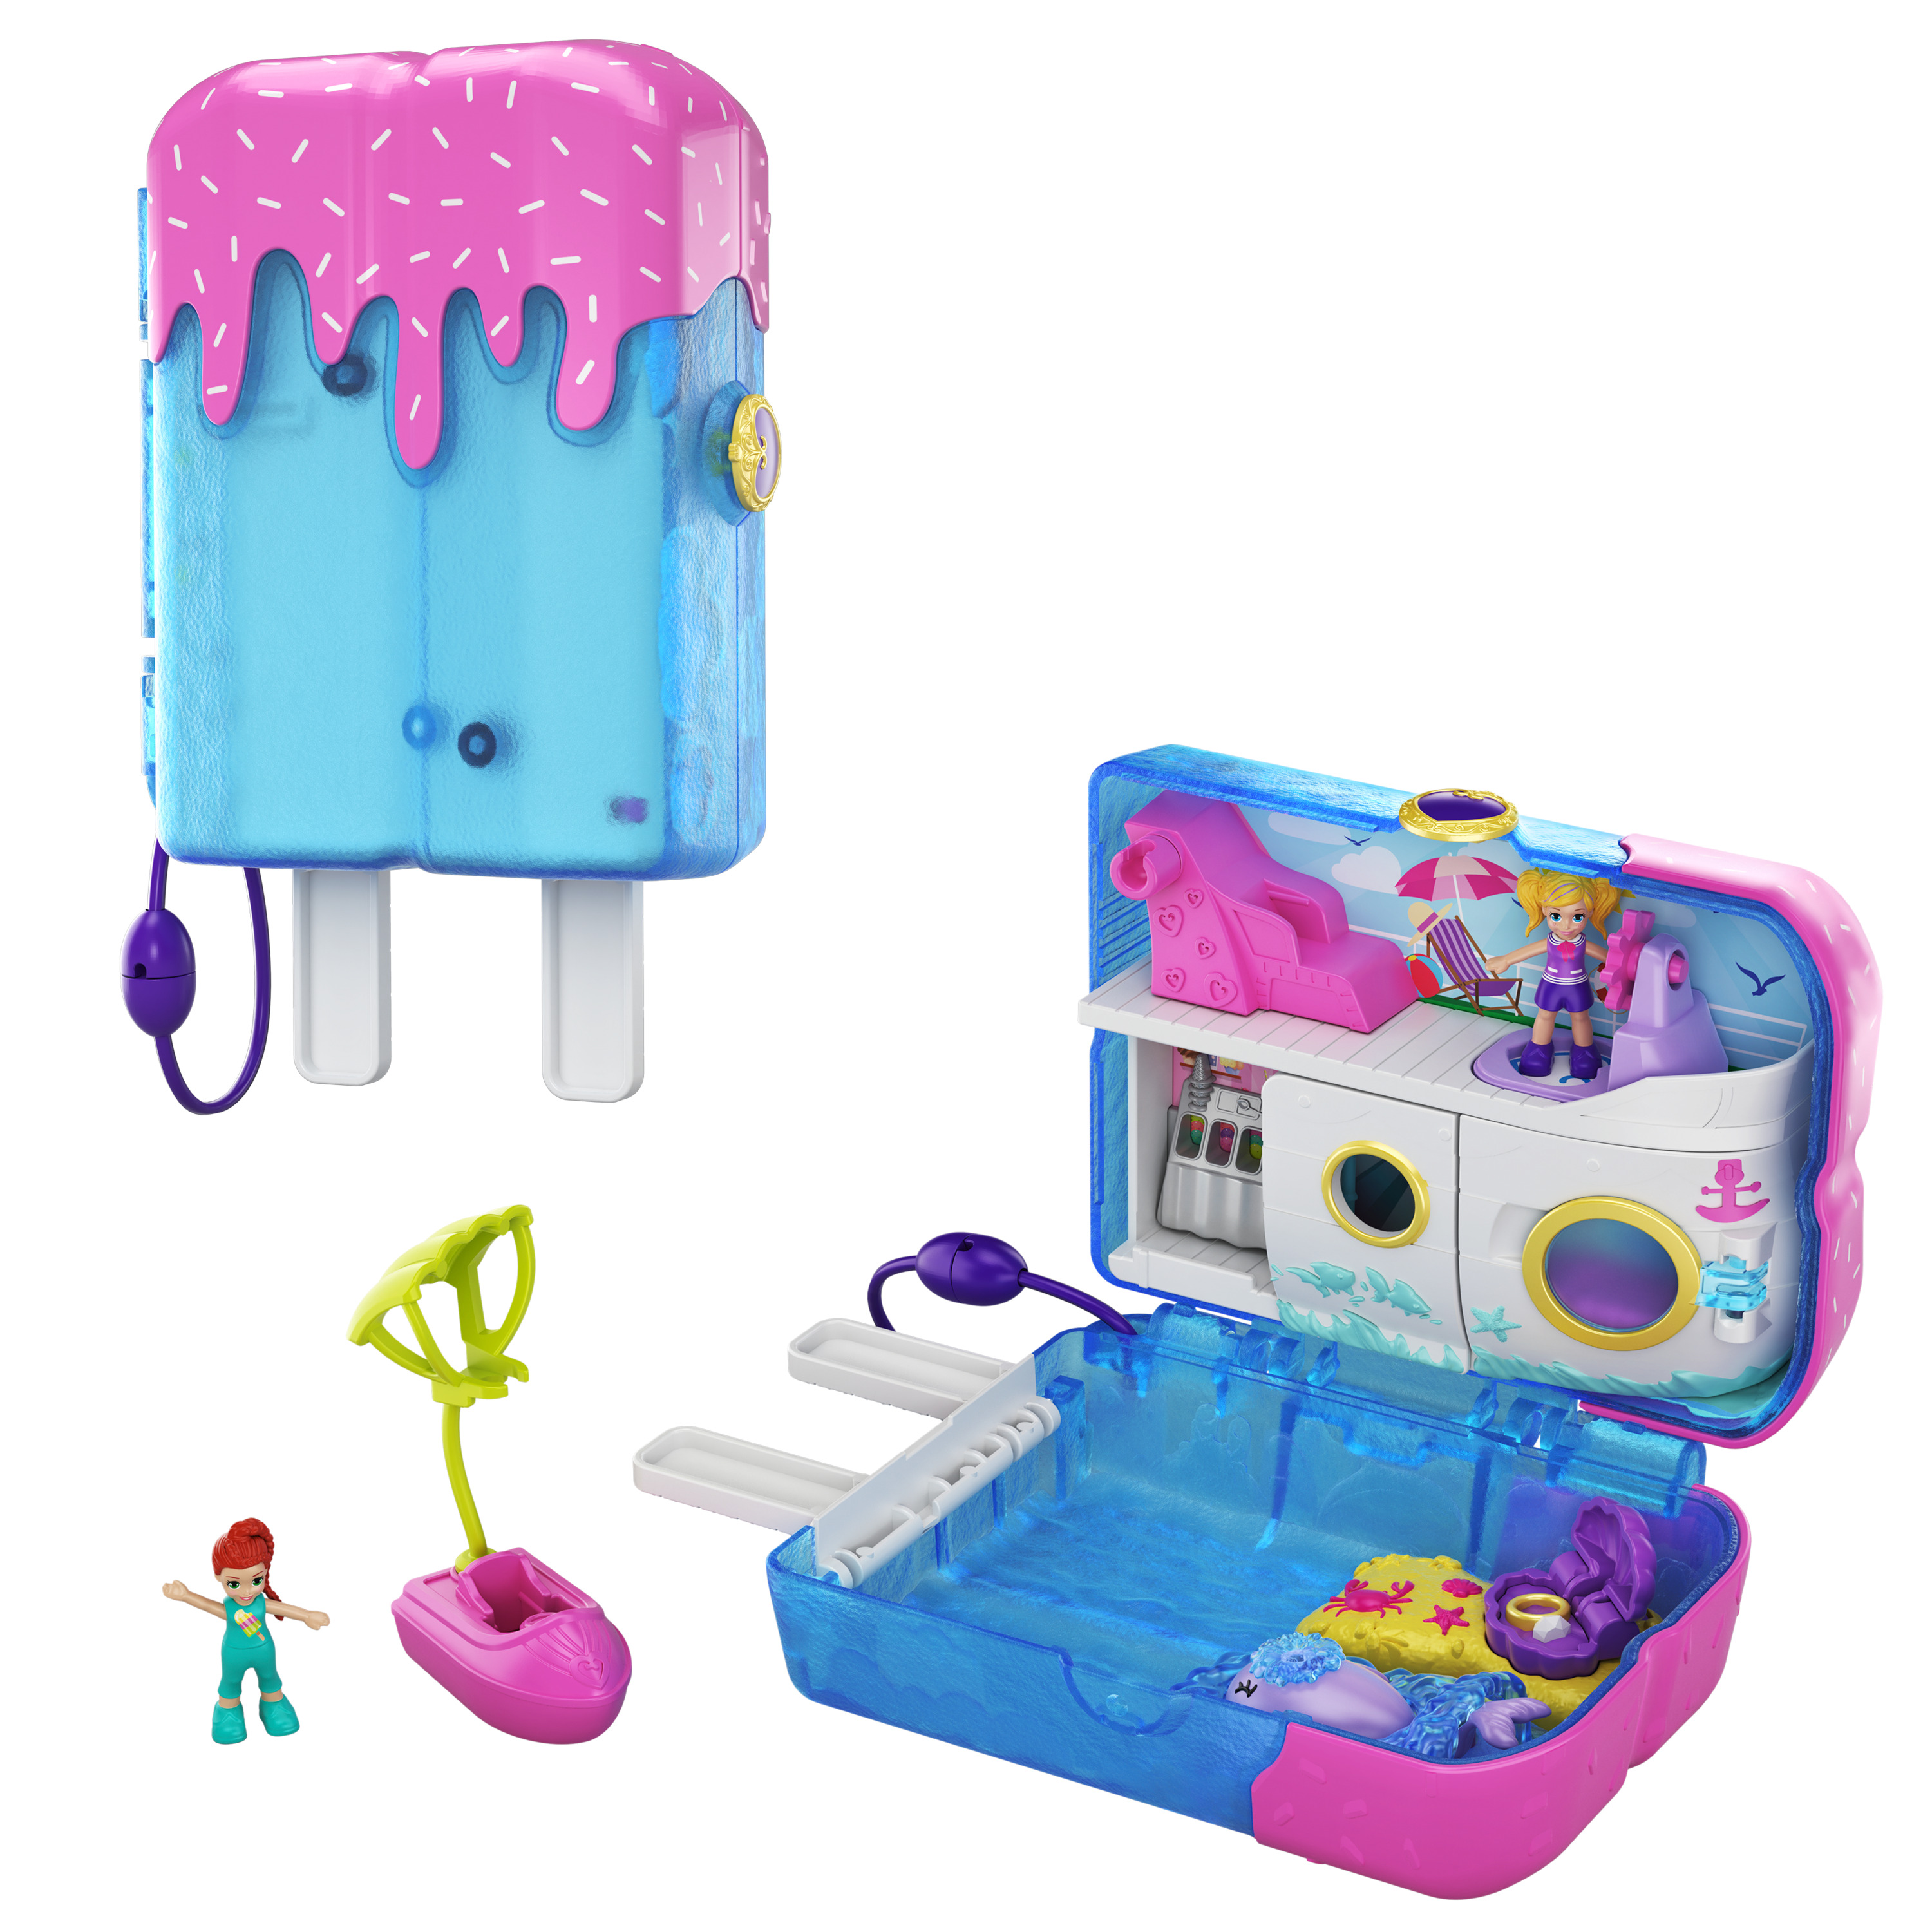 Polly Pocket Pocket World Sweet Sails Cruise Ship Compact Playset with 2 Micro Dolls & Accessories - image 1 of 7